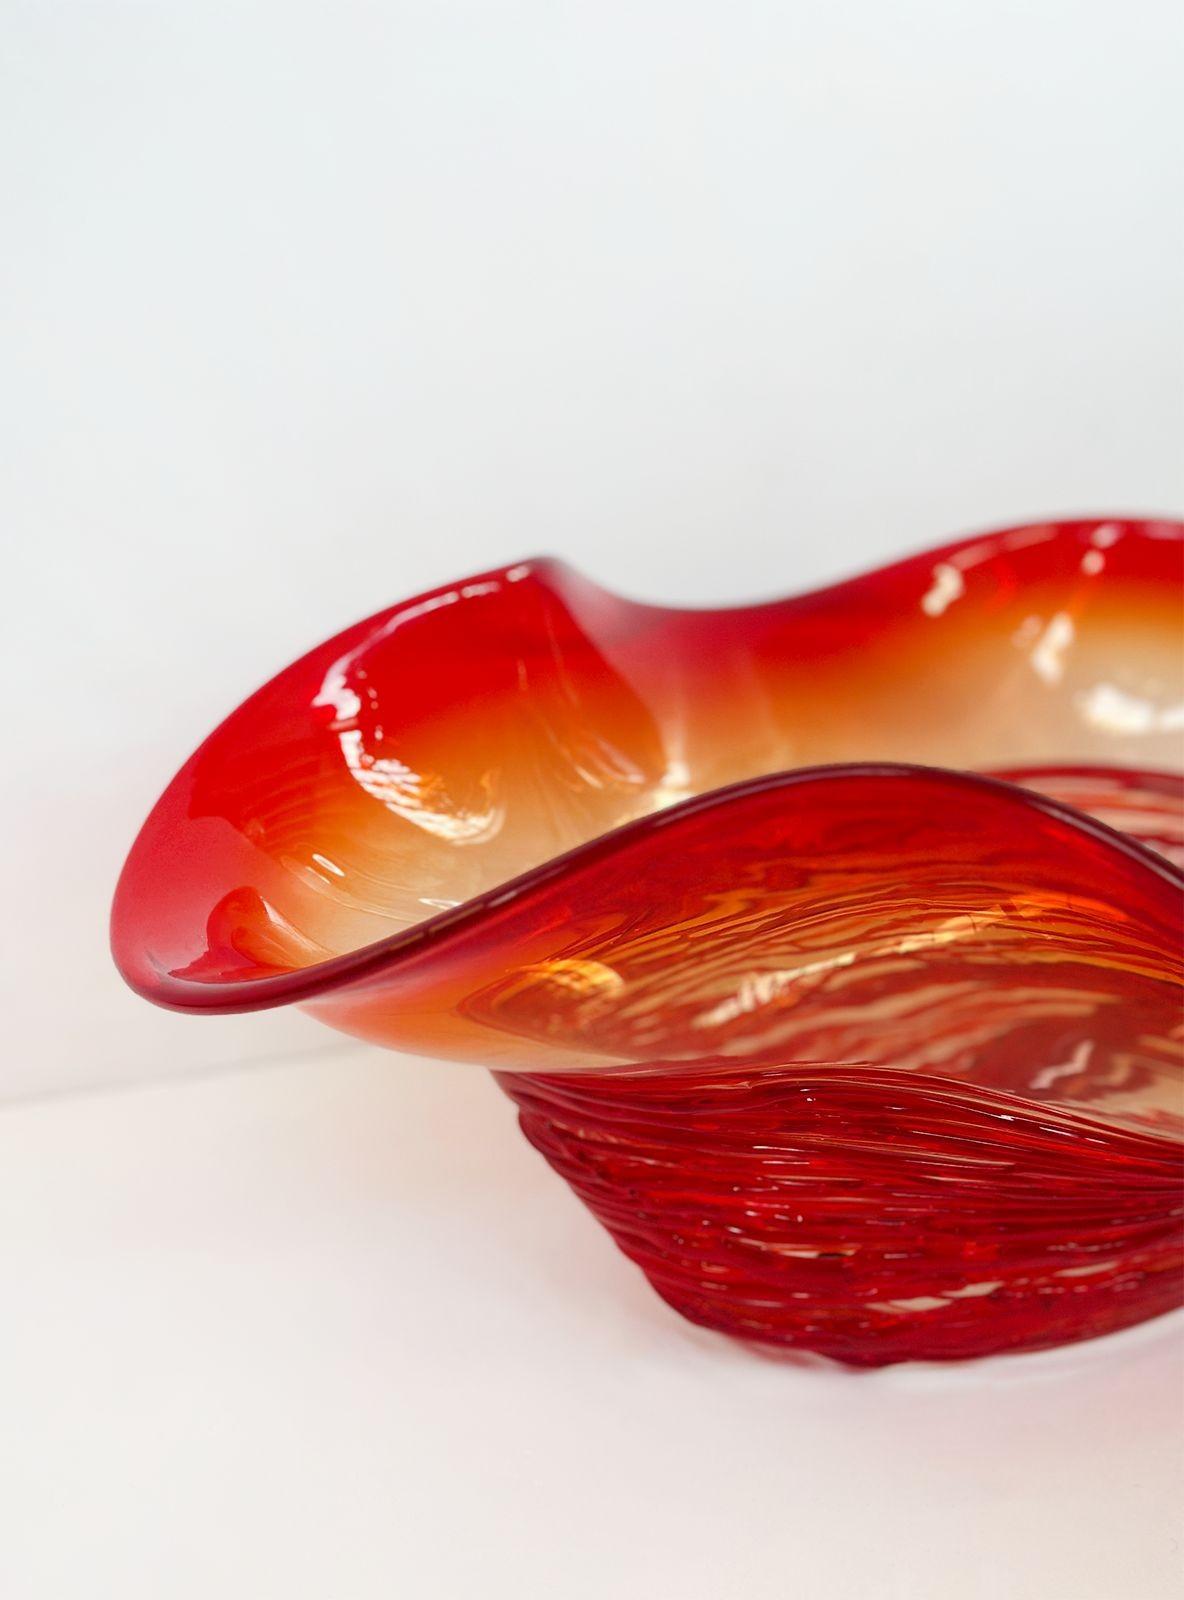 Stunning vintage red Murano glass bowl made by Camozzo during the 1970's. This exquisite piece showcases vibrant red tones, accentuated by subtle orange details that gracefully blend together, creating a captivating visual appeal. The bowl's unique